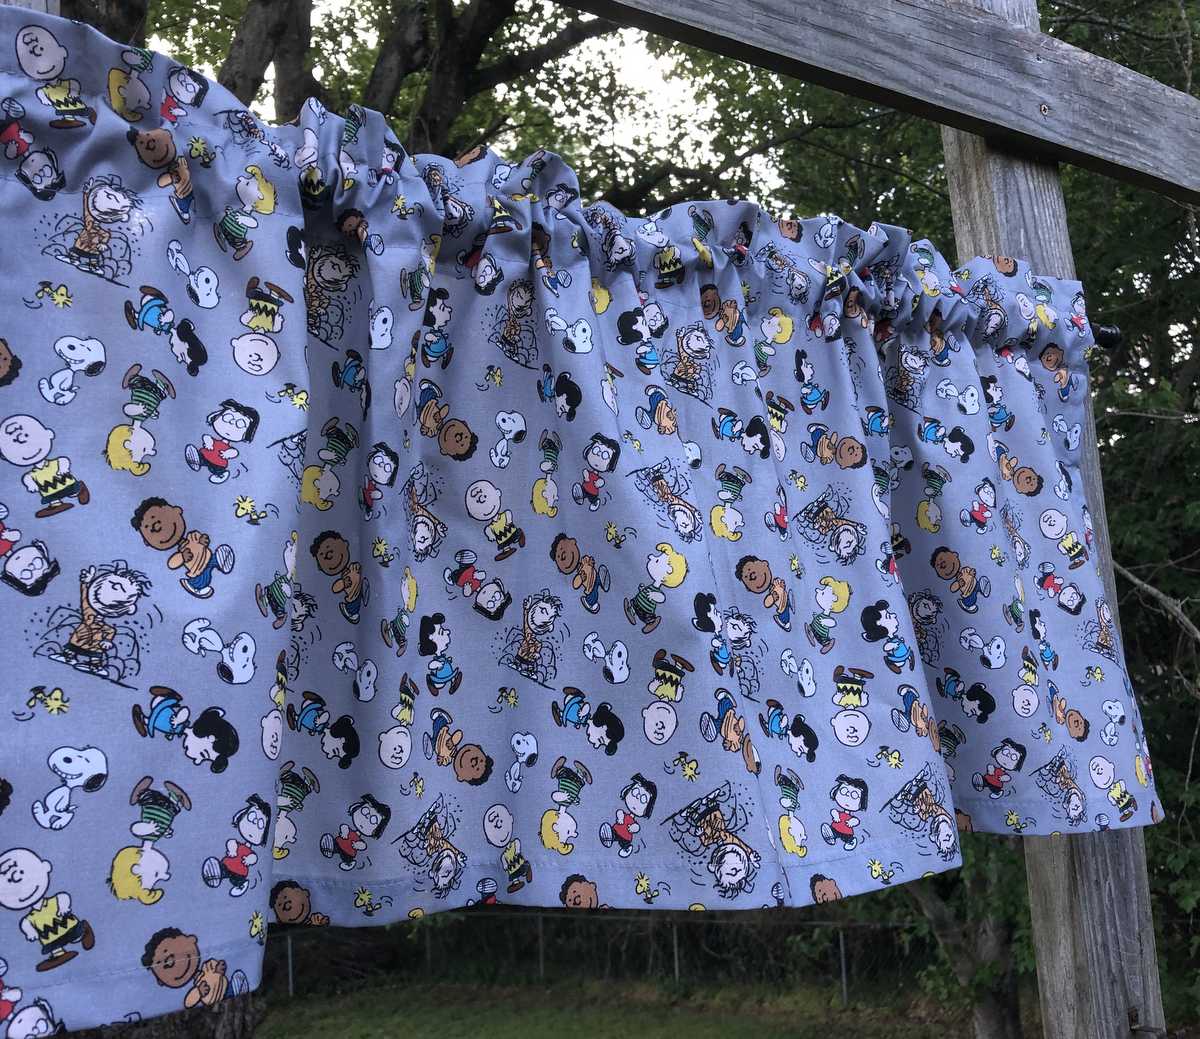 Girl Boy Baby Nursery Curtain Valance Handcrafted From Cartoon Character Dog Kids Cotton Fabric